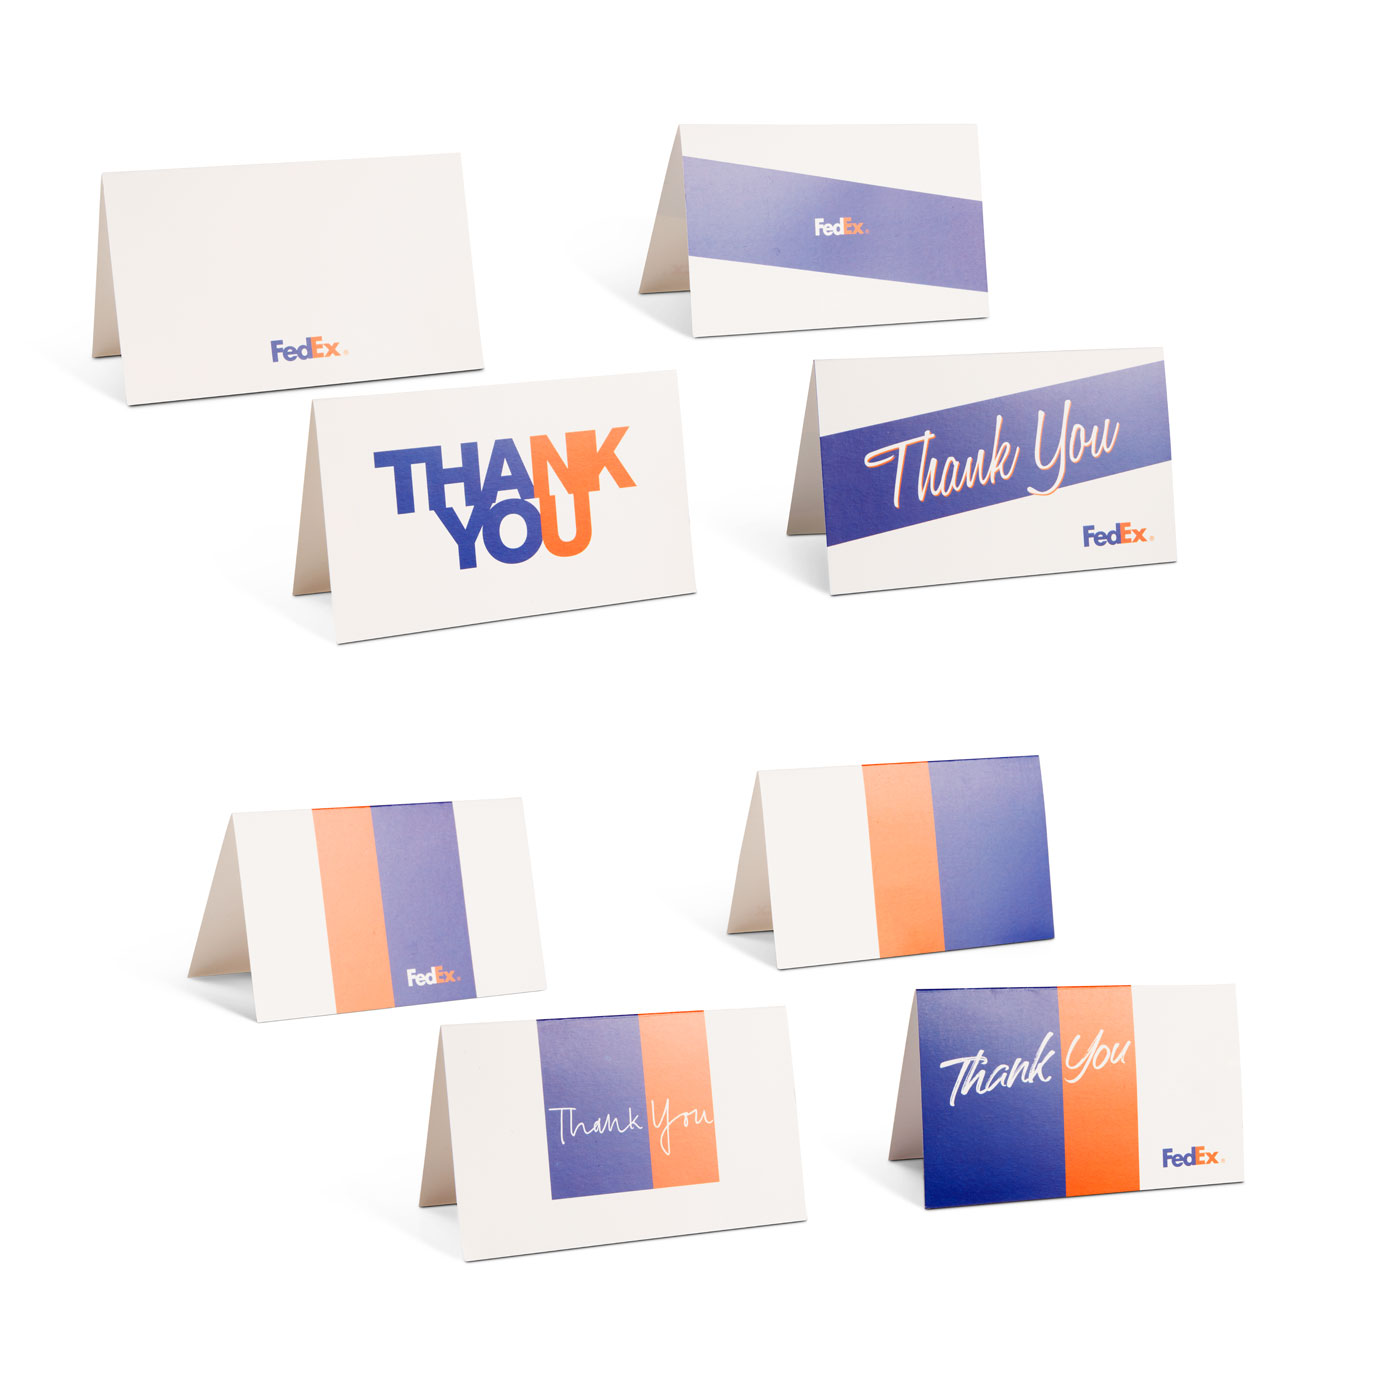 Fedex Business Cards / Custom Design Services And Document Creation